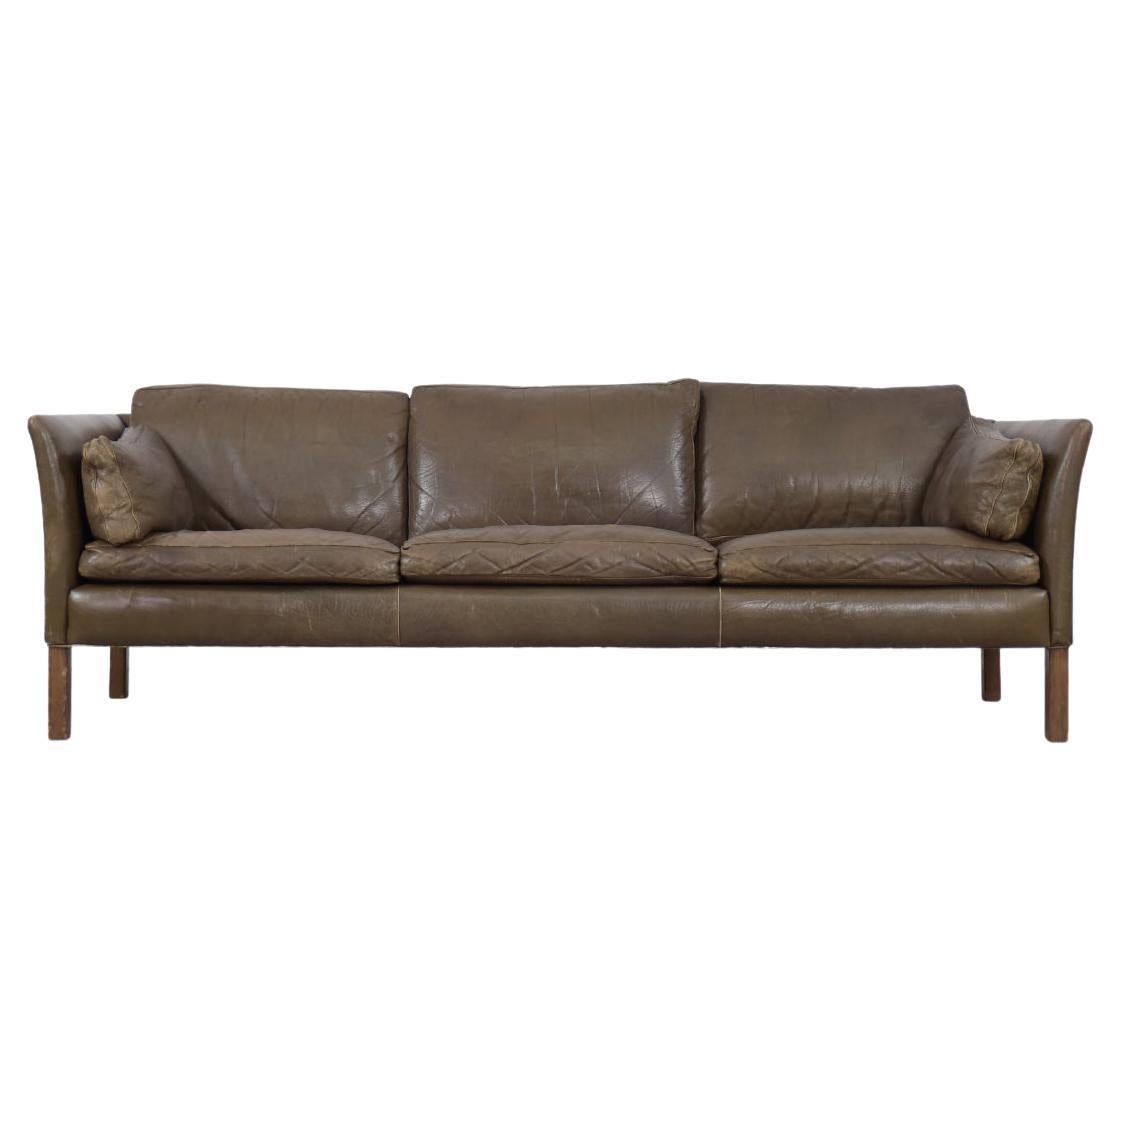 Vintage Mid-Century Modern Swedish Leather Cromwell Sofa by Arne Norell, 1960s